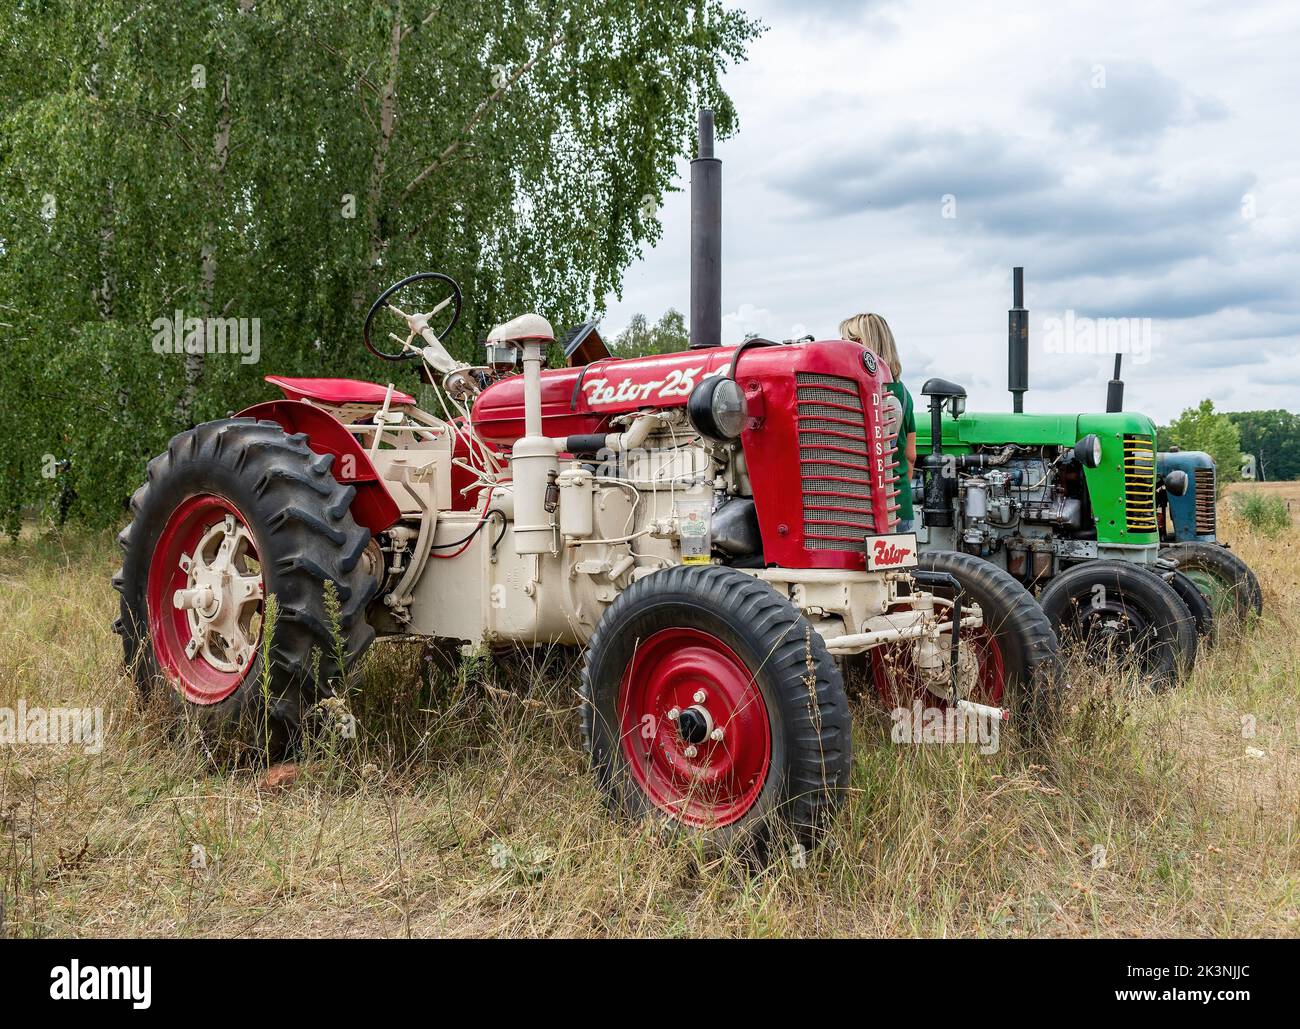 Exhibition of contemporary and historical tractors - Zetor 25 tractor Stock Photo